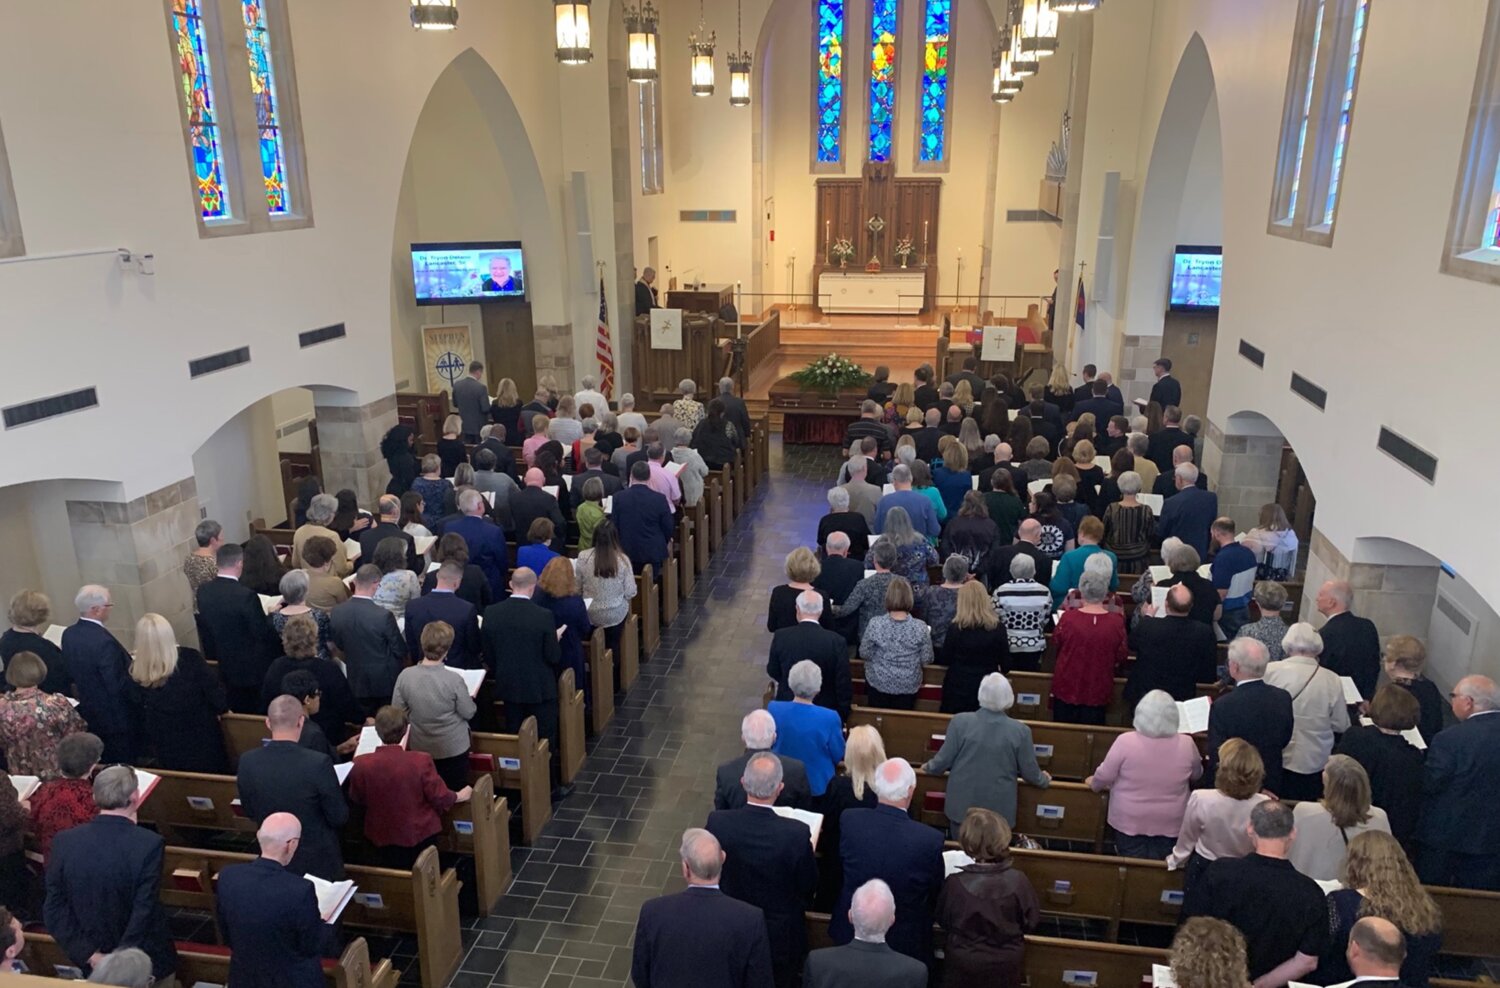 Retired Cumberland County Schools educators were among those attending the Jan. 27 funeral service for Tyron Lancaster at Haymount United Methodist Church.